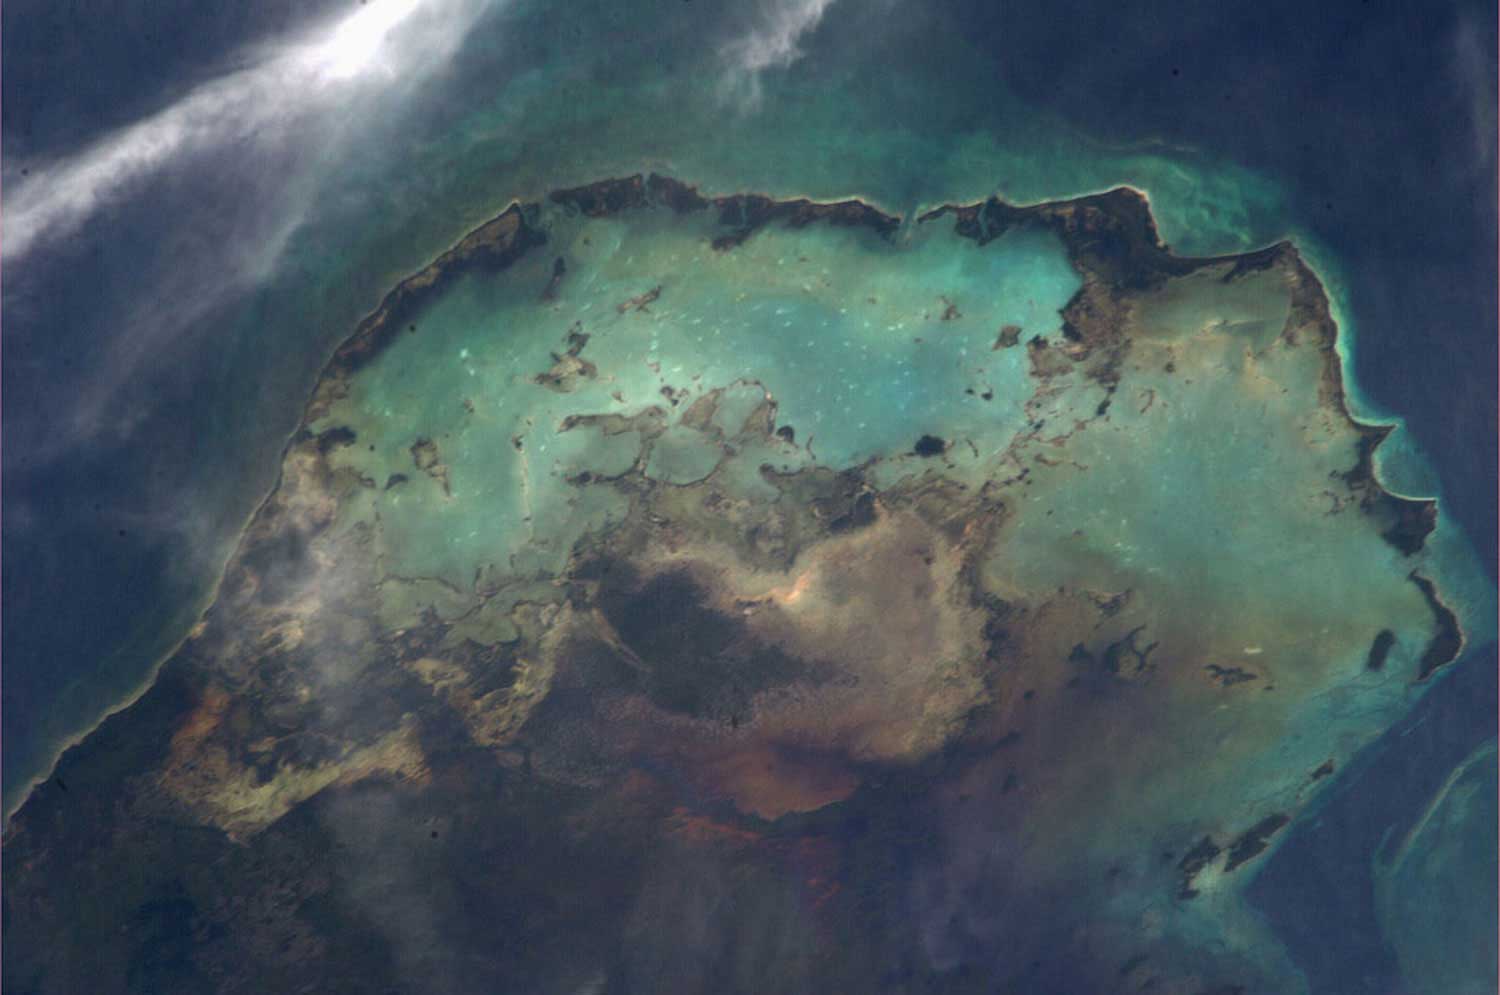 The Caribbean Sea, as seen from the international space station on Aug. 13, 2013.